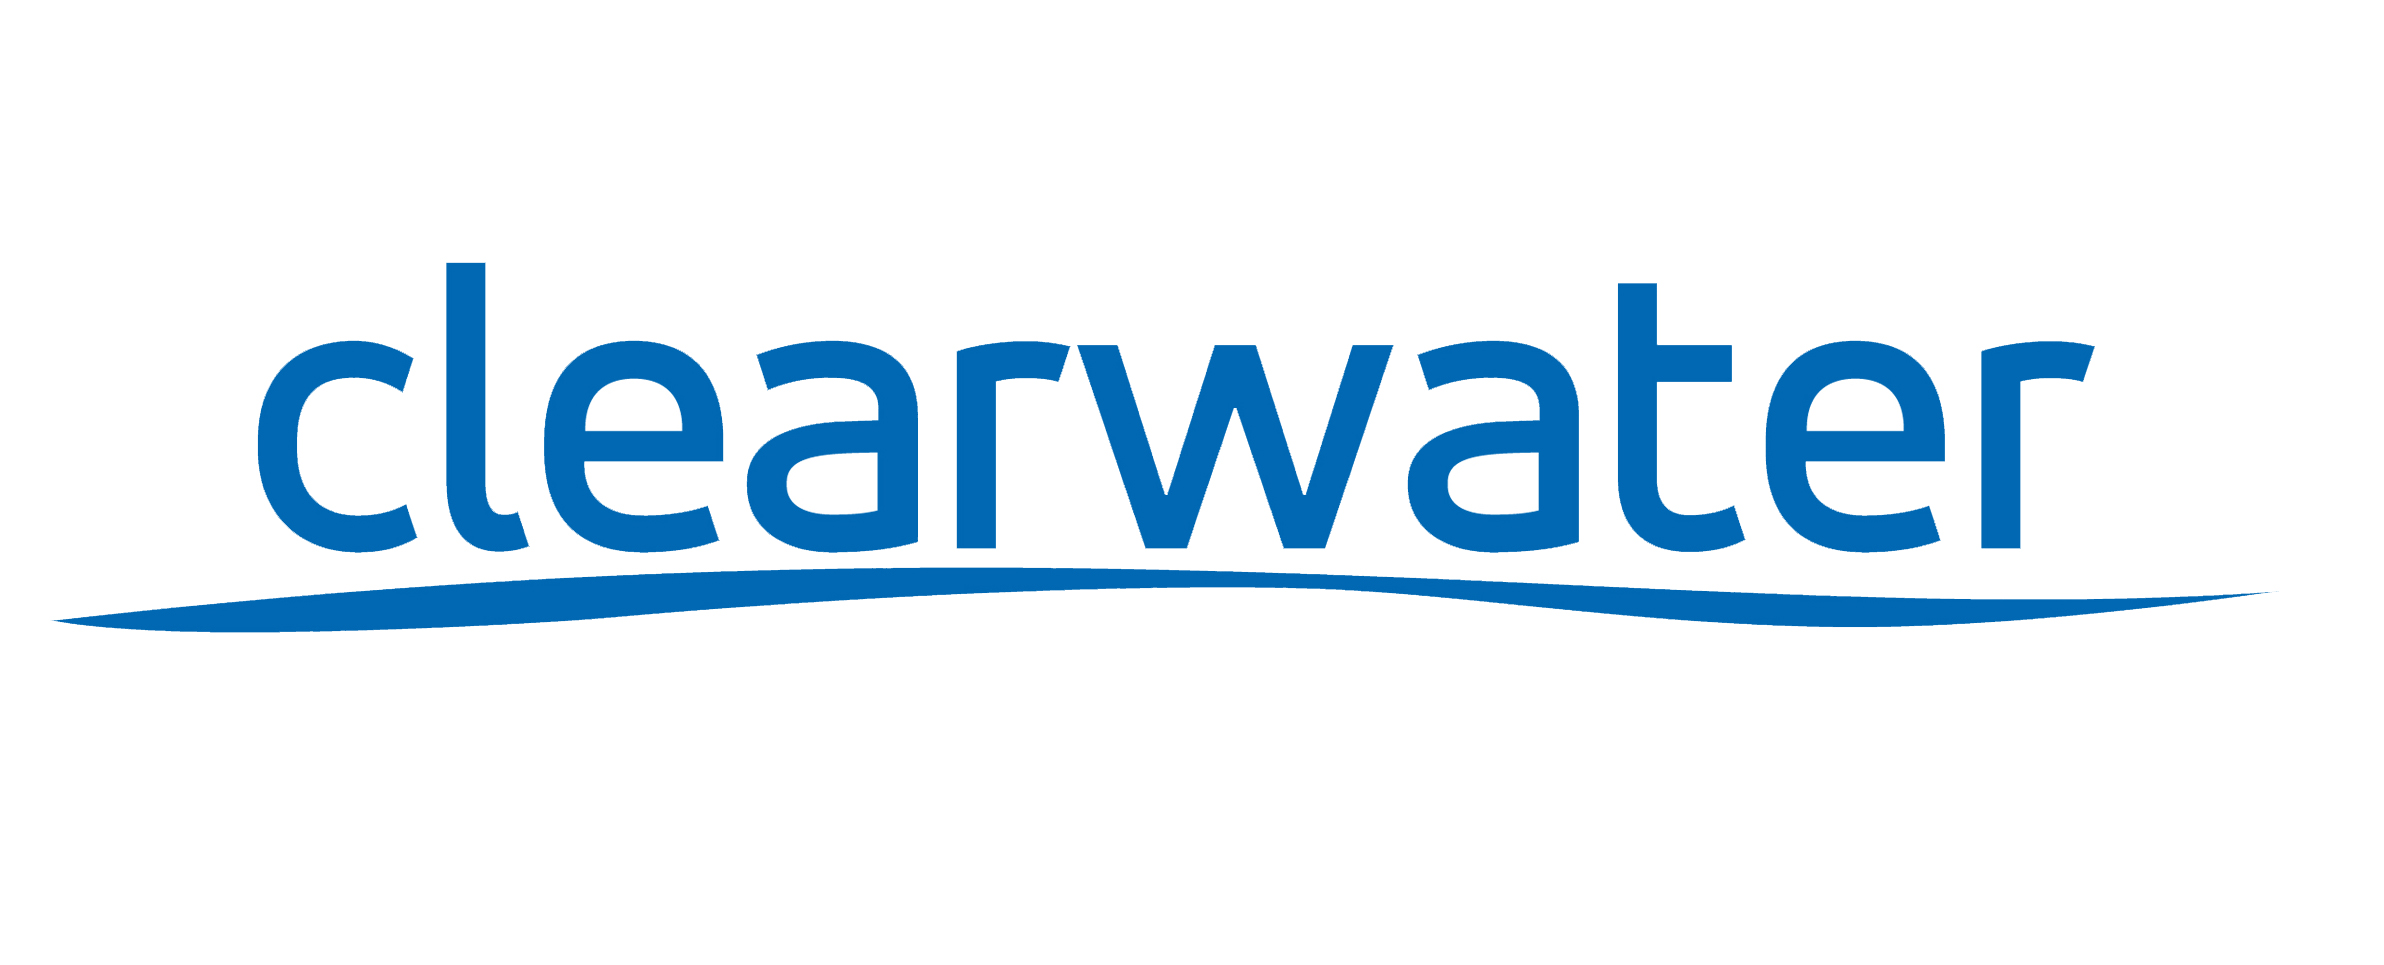 Clearwater Analytics Files Registration Statement for Proposed Initial Public Offering 